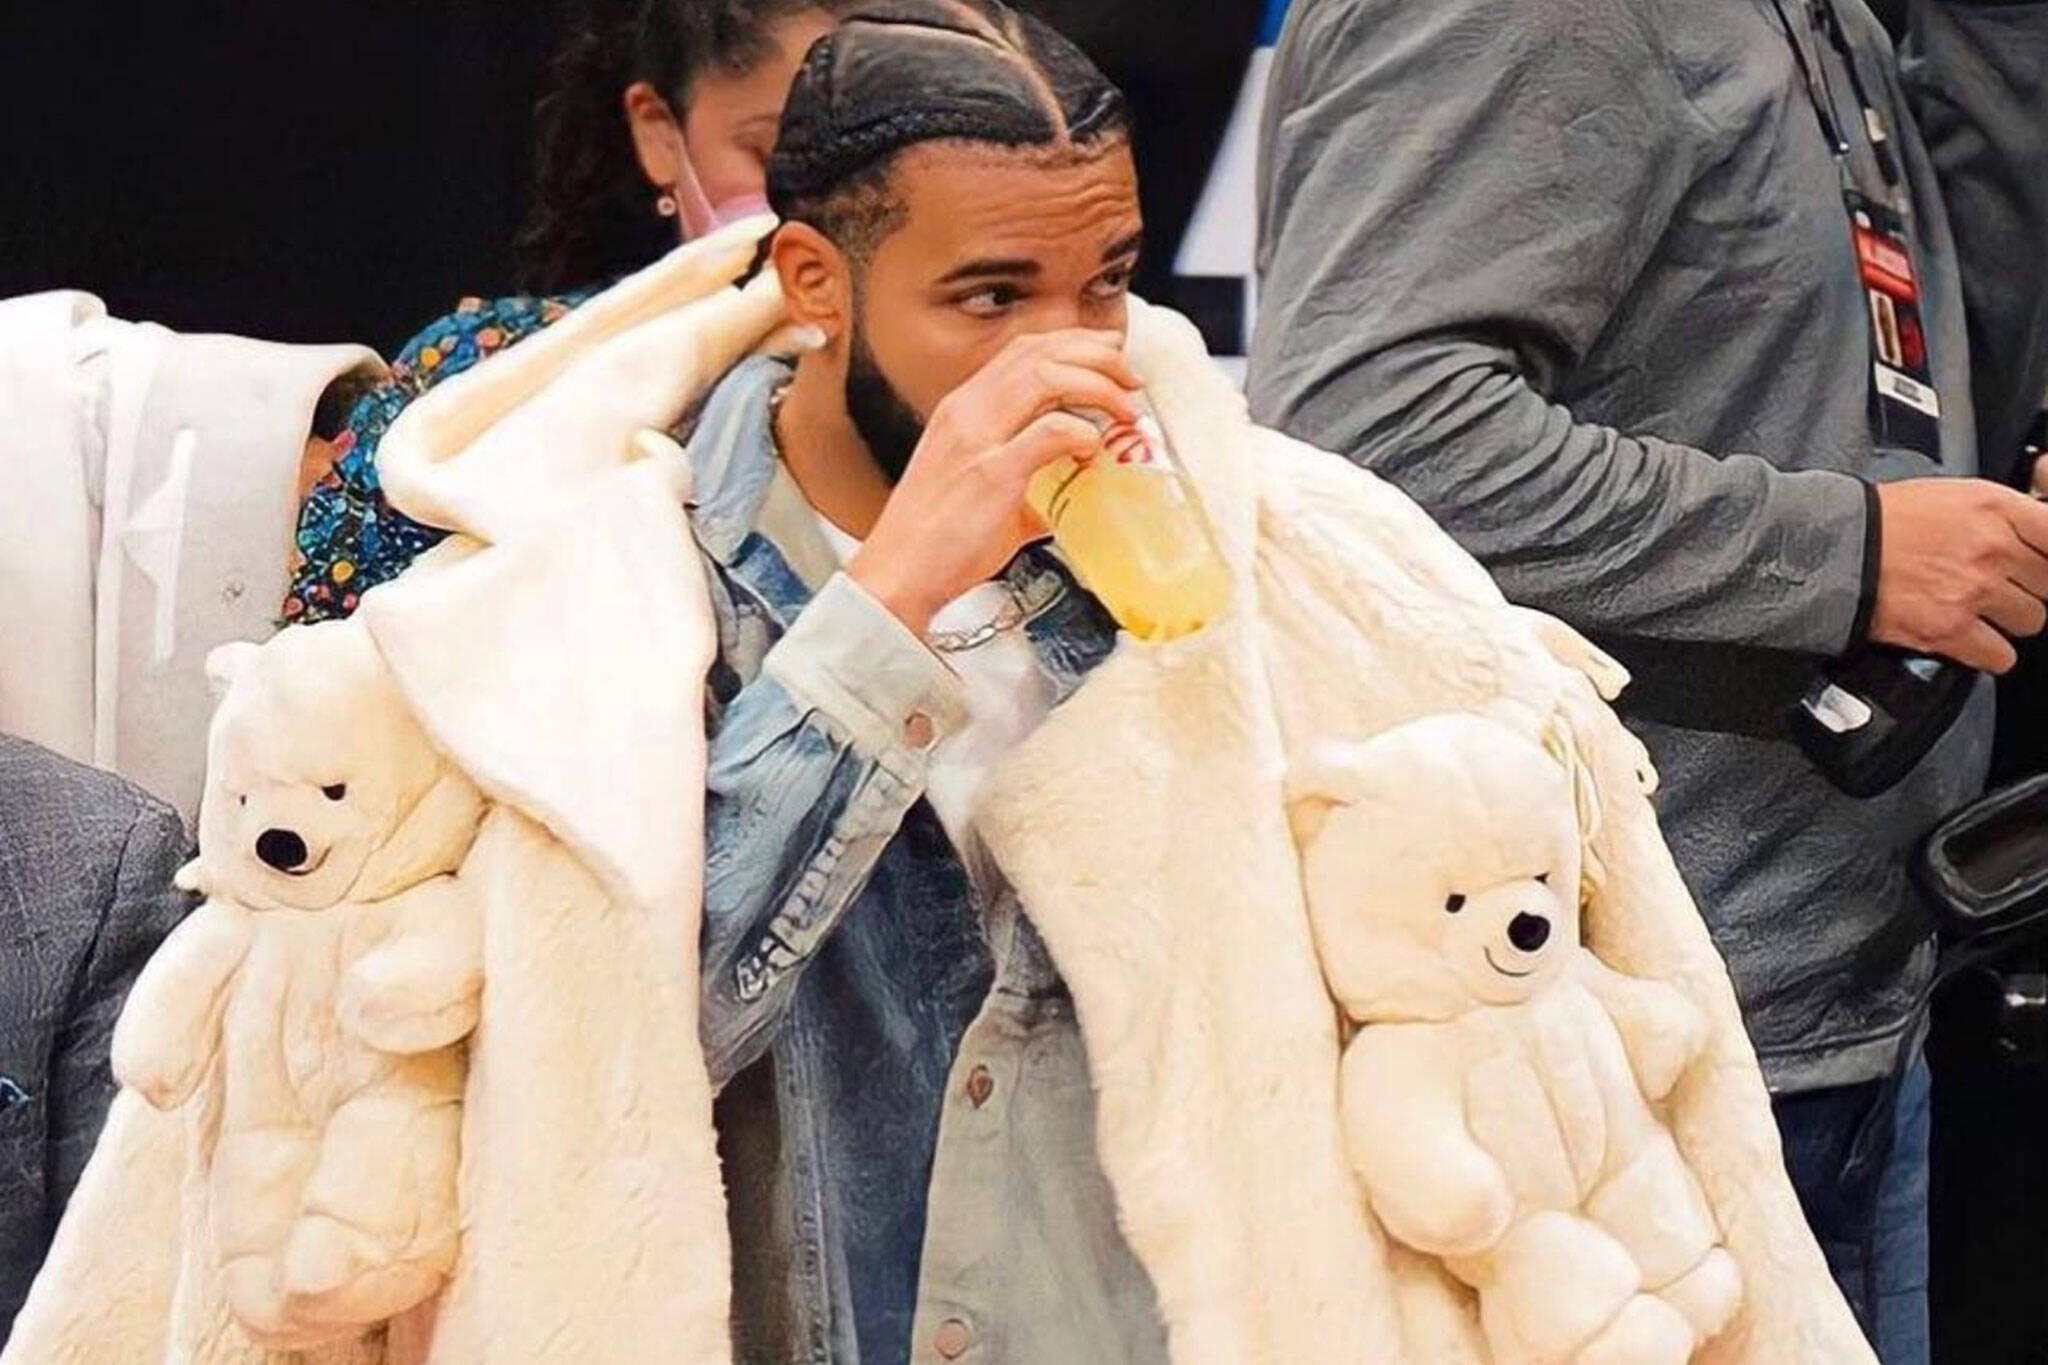 Internet abuzz after Drake wears ridiculous teddy bear coat to